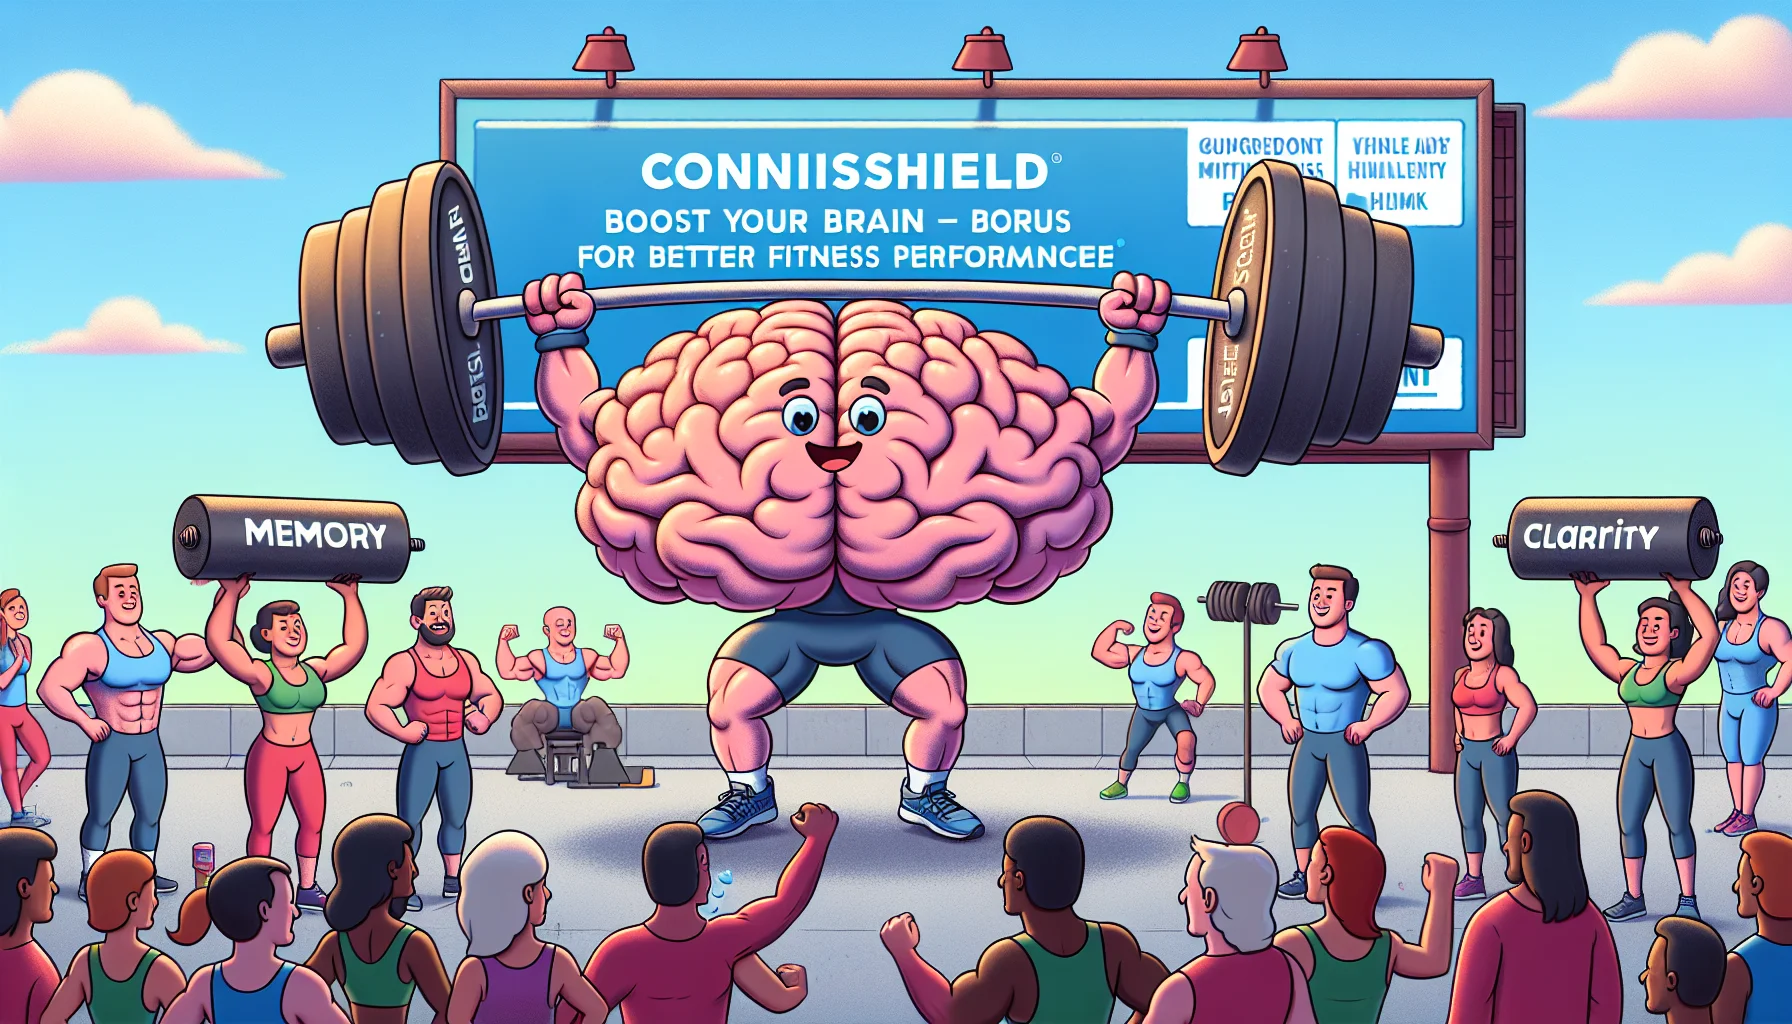 Create a humorous scenario promoting 'CogniShield' for its fitness enhancing capabilities. Picture a brain with cartoonish muscular arms and legs doing deadlifts with barbells labelled 'memory', 'focus', and 'clarity'. A crowd of different people with varying genders and descents, including Caucasian, Black, Hispanic, Middle-Eastern and South Asian individuals are cheering for the brain. In the background, place a billboard advertising 'CogniShield: Boost Your Brain for Better Fitness Performance'. The color scheme should be vibrant, healthy and inviting. Add soft strokes and hazy effects for the finishing touch.